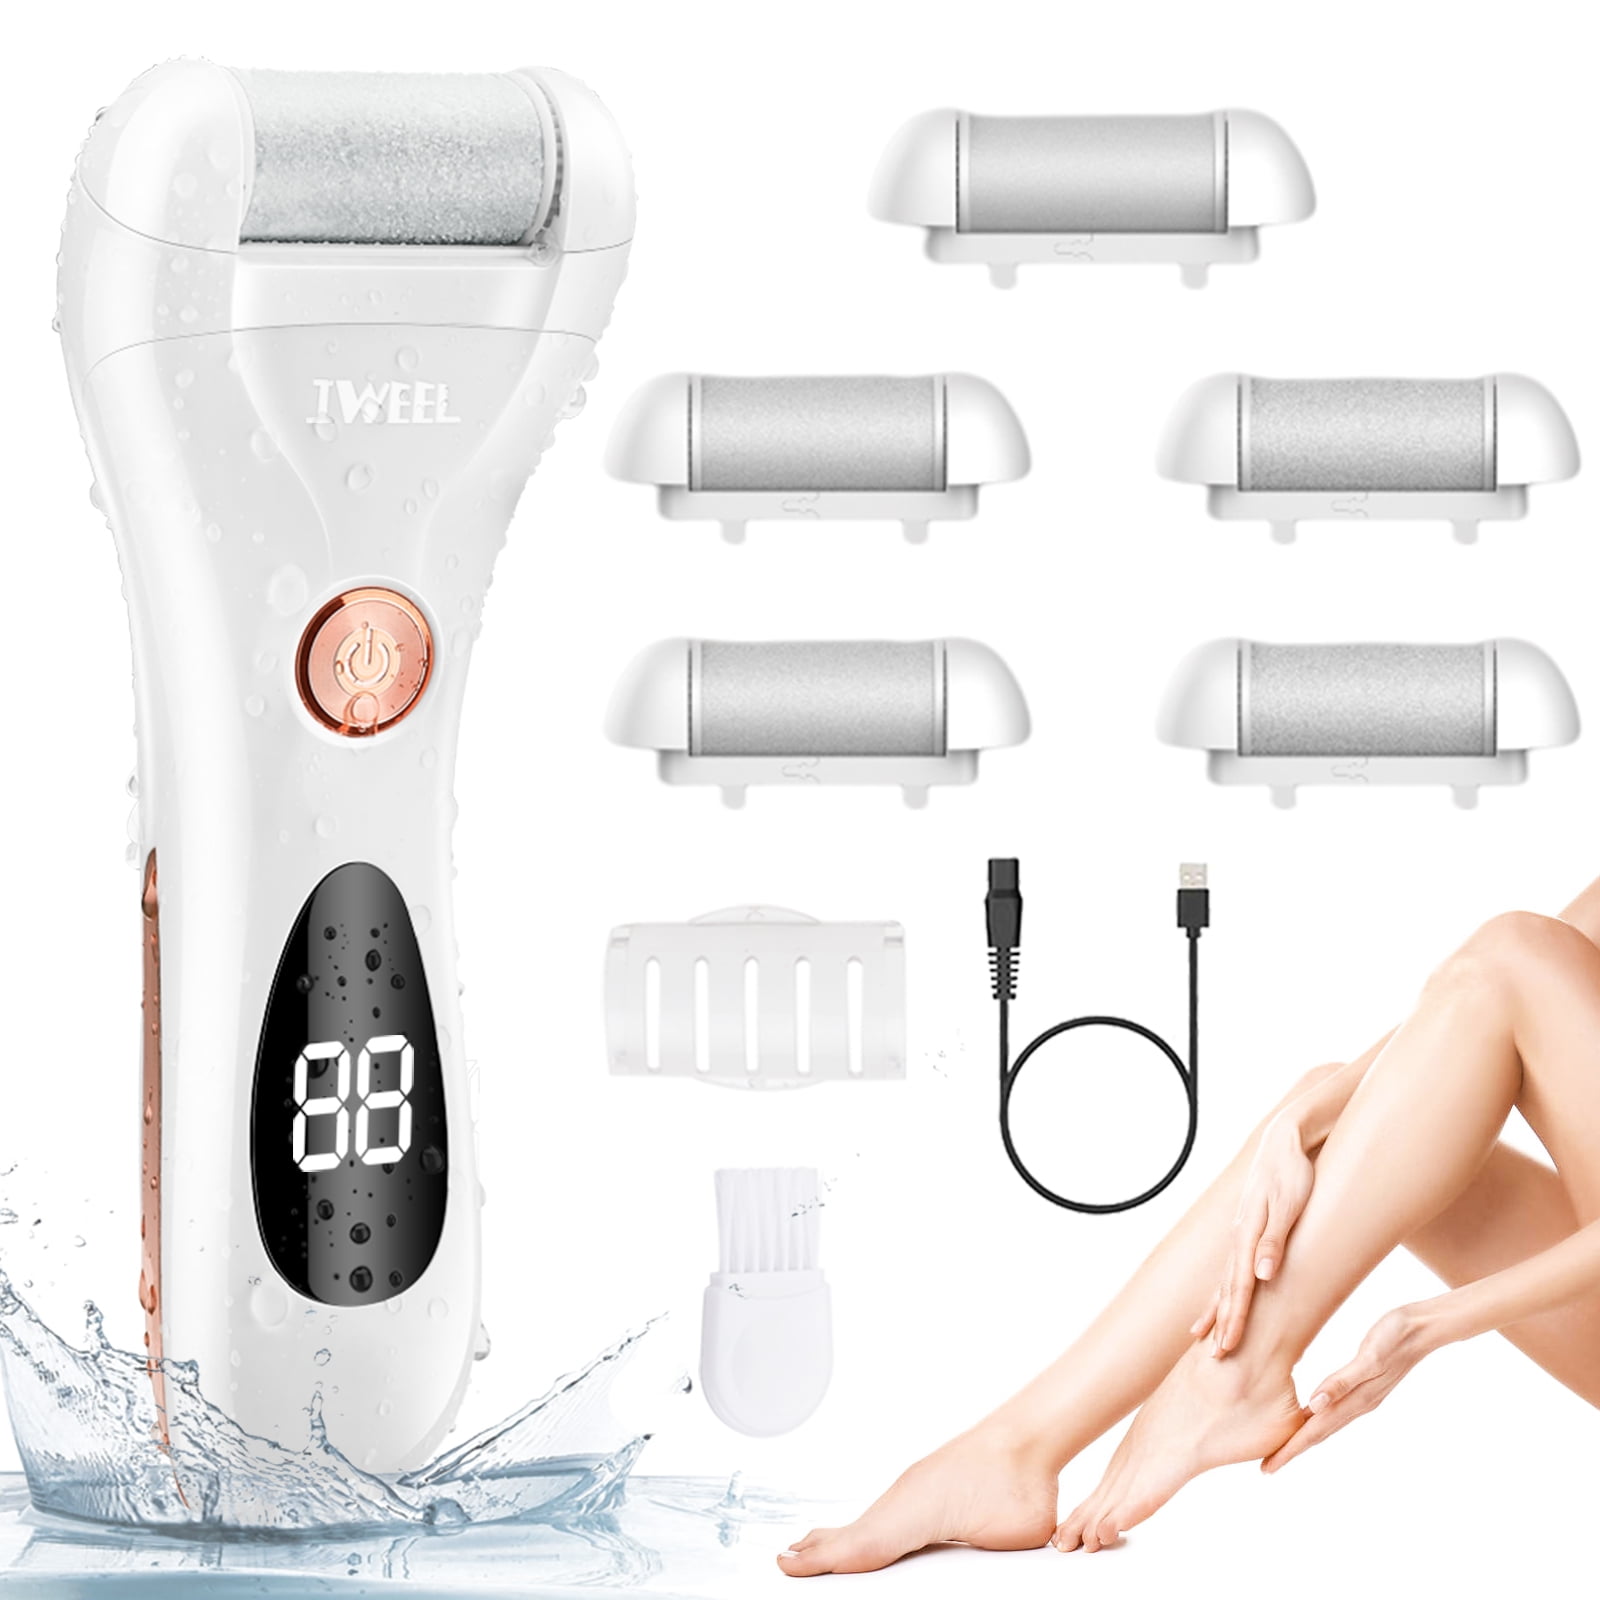 TE Foot Roller Callus Remover Hard and Dead Skin Remover